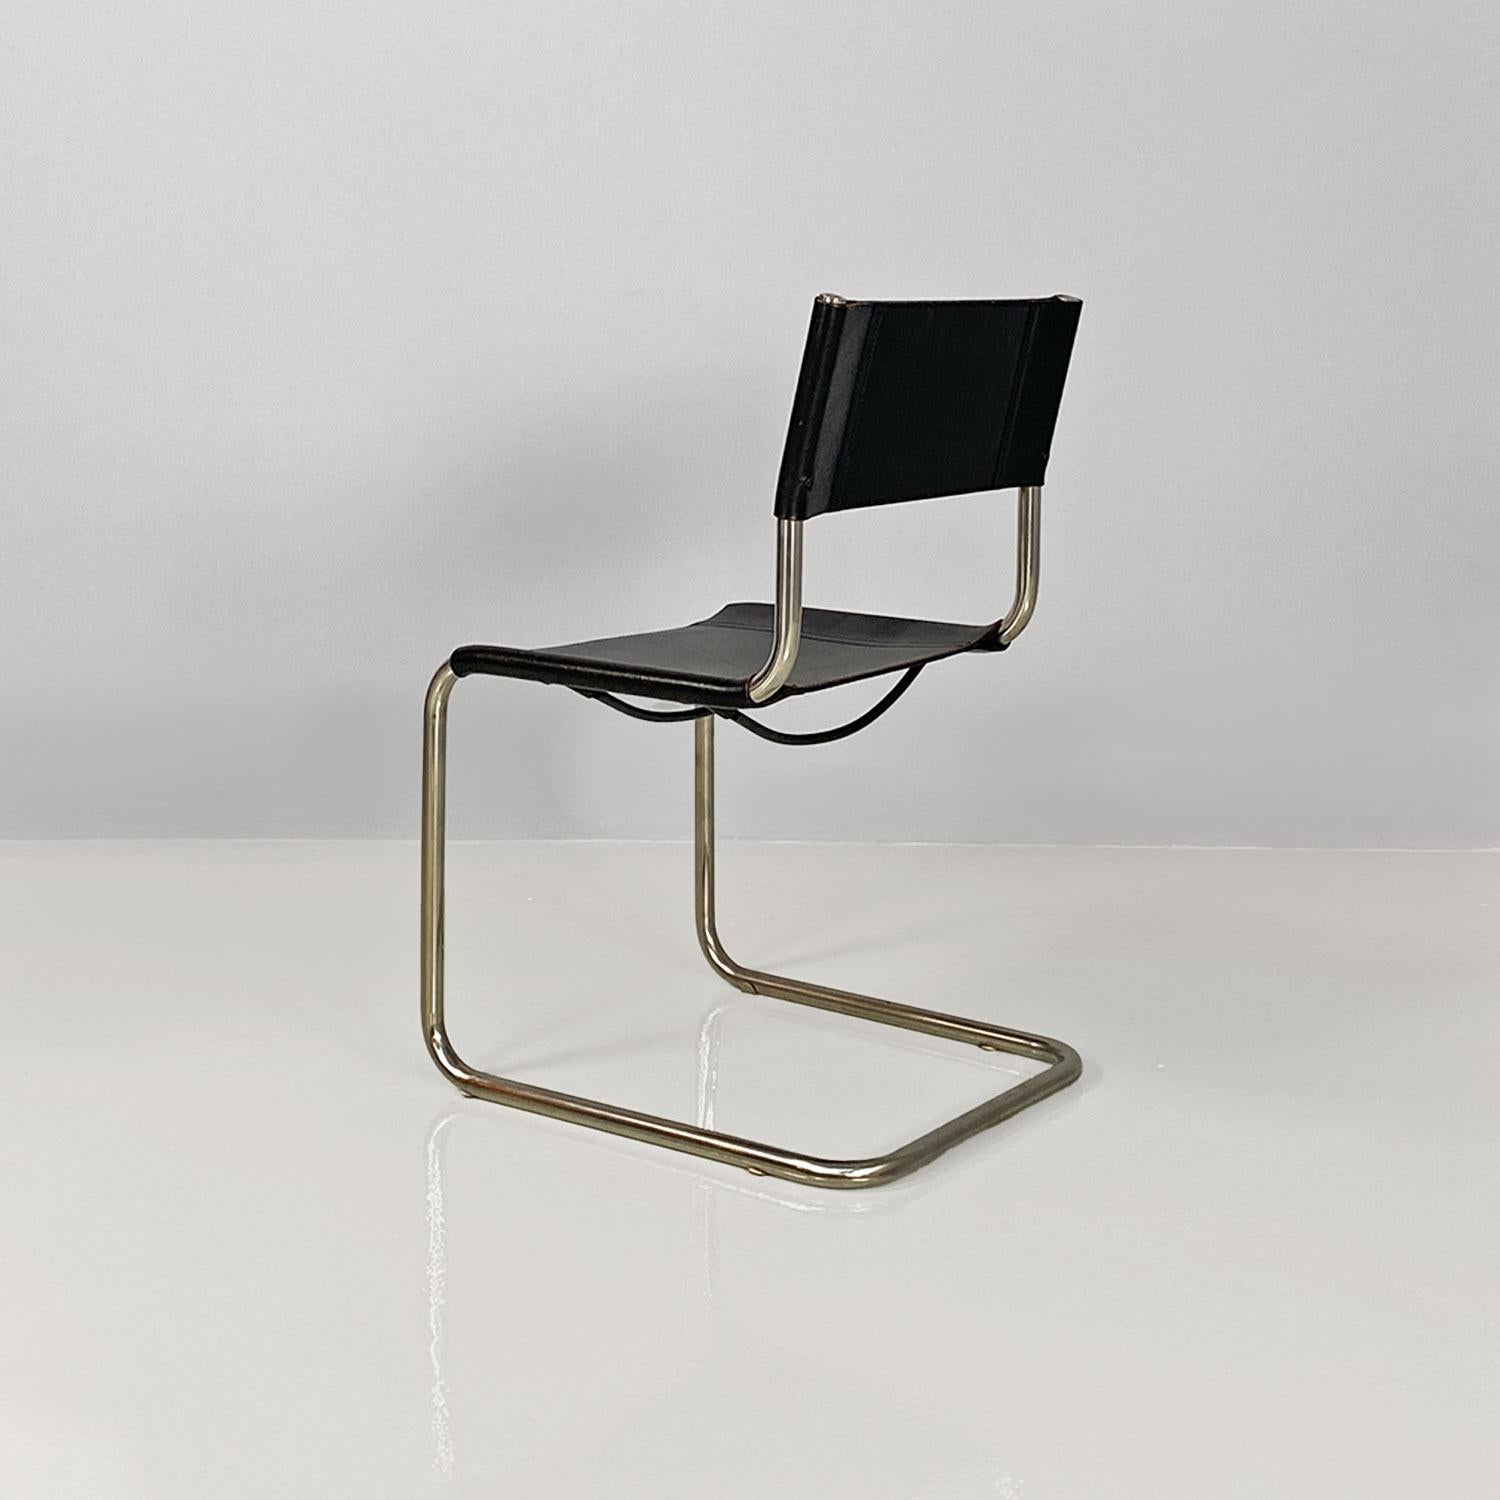 Metal Italian modern black leather and tubolar chromed metal chairs by Zanotta, 1970s For Sale